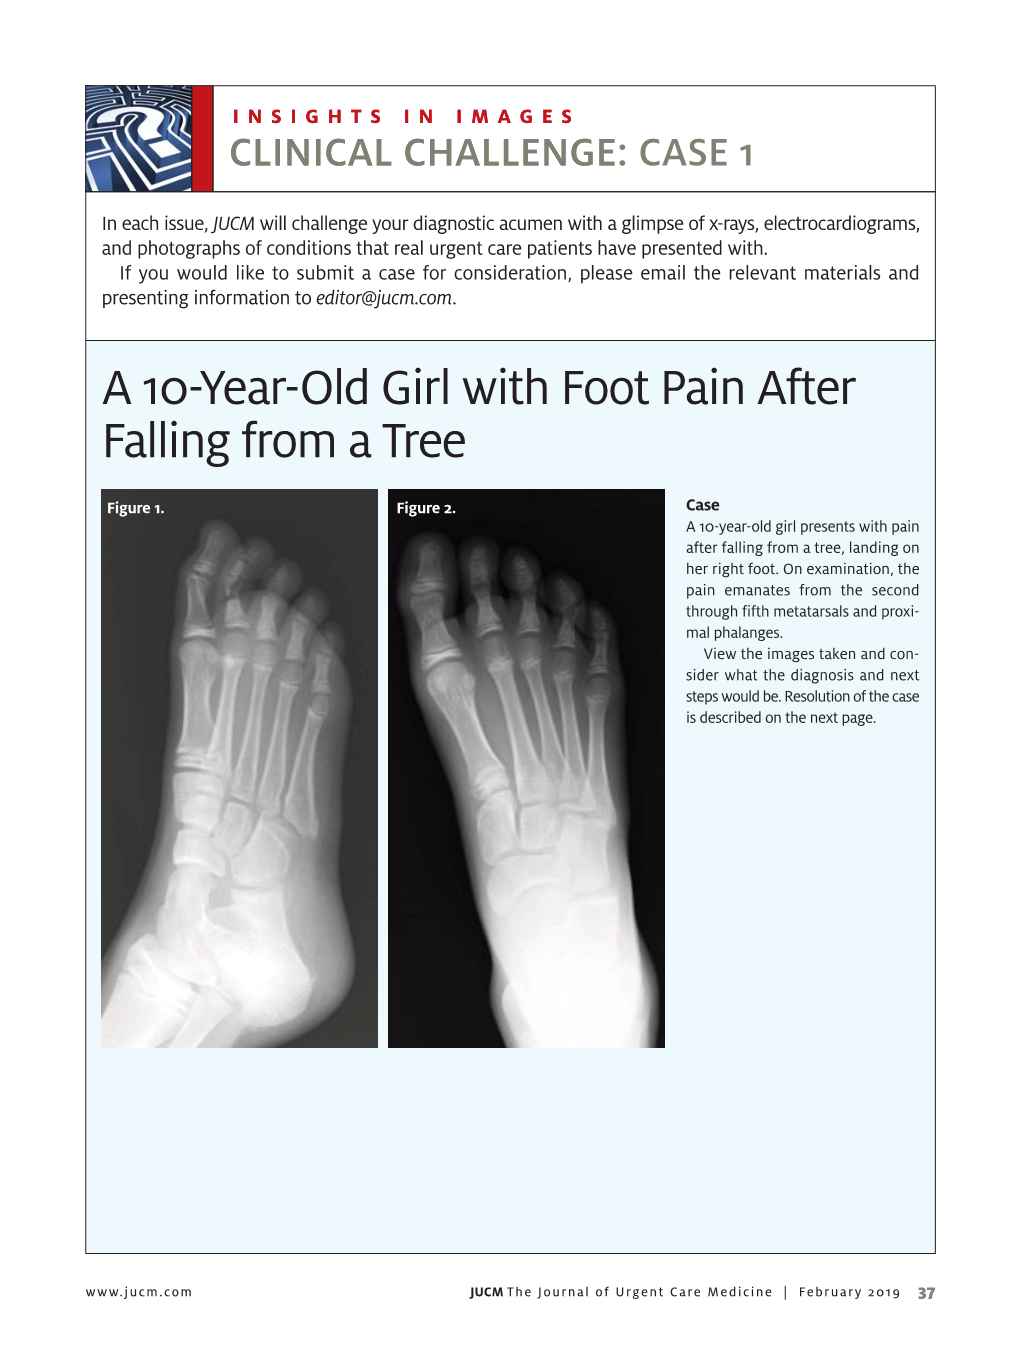 A 10-Year-Old Girl with Foot Pain After Falling from a Tree